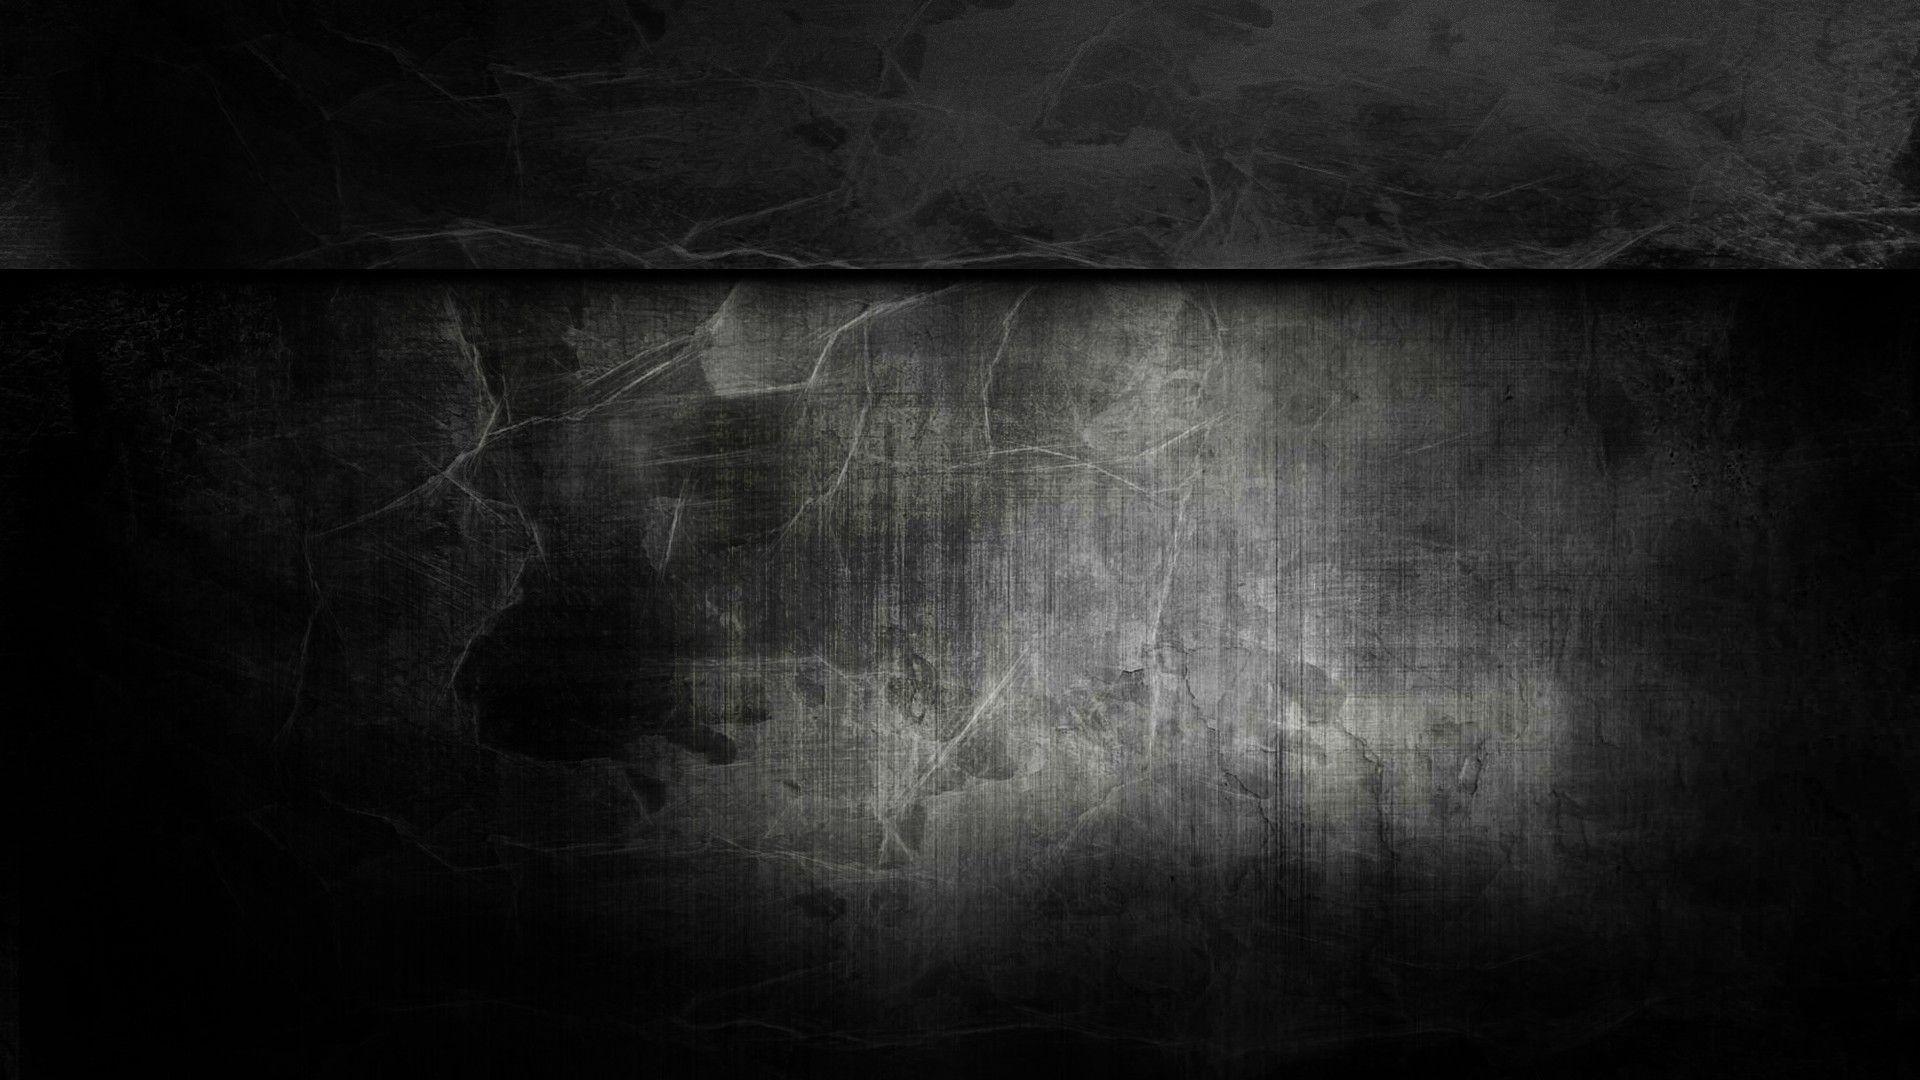 Abstract Grunge Wallpaper Texture Background Black And White Stock  Illustration  Download Image Now  iStock